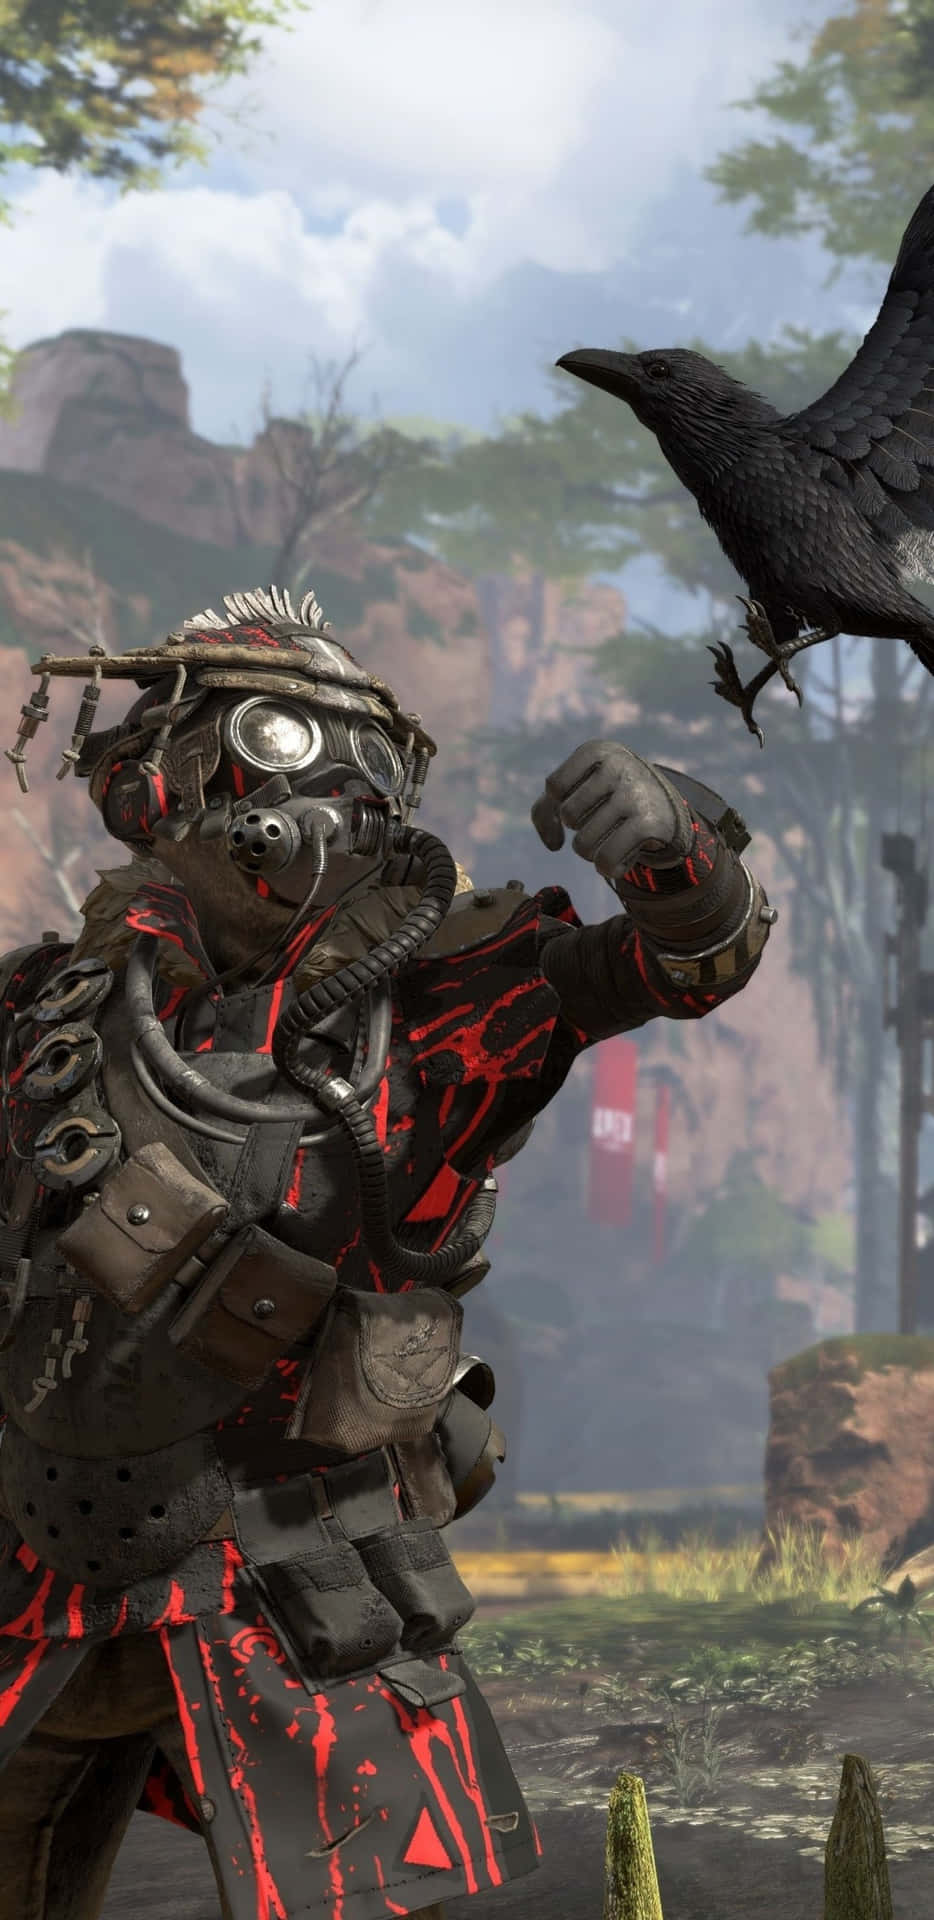 Outperform your opponents with the Google Pixel 3xl and Apex Legends